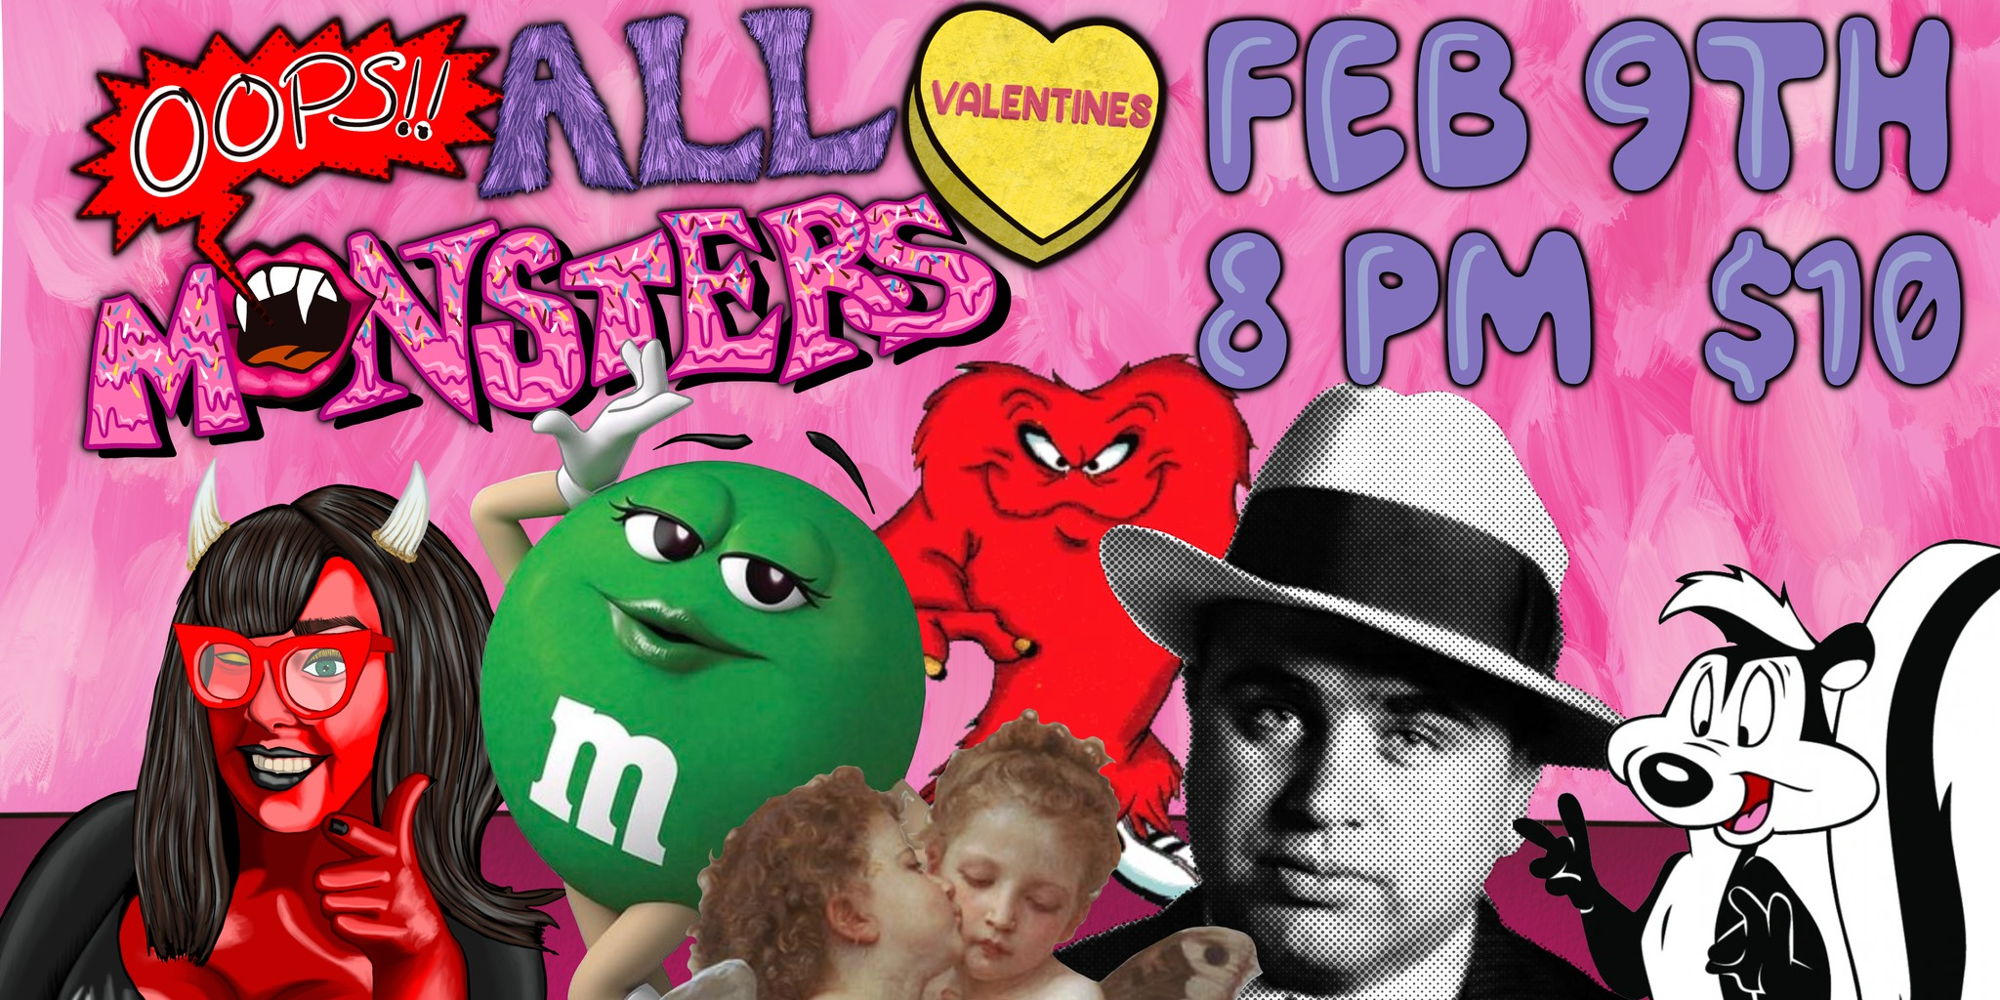 Oops! All Valentine's Monsters promotional image